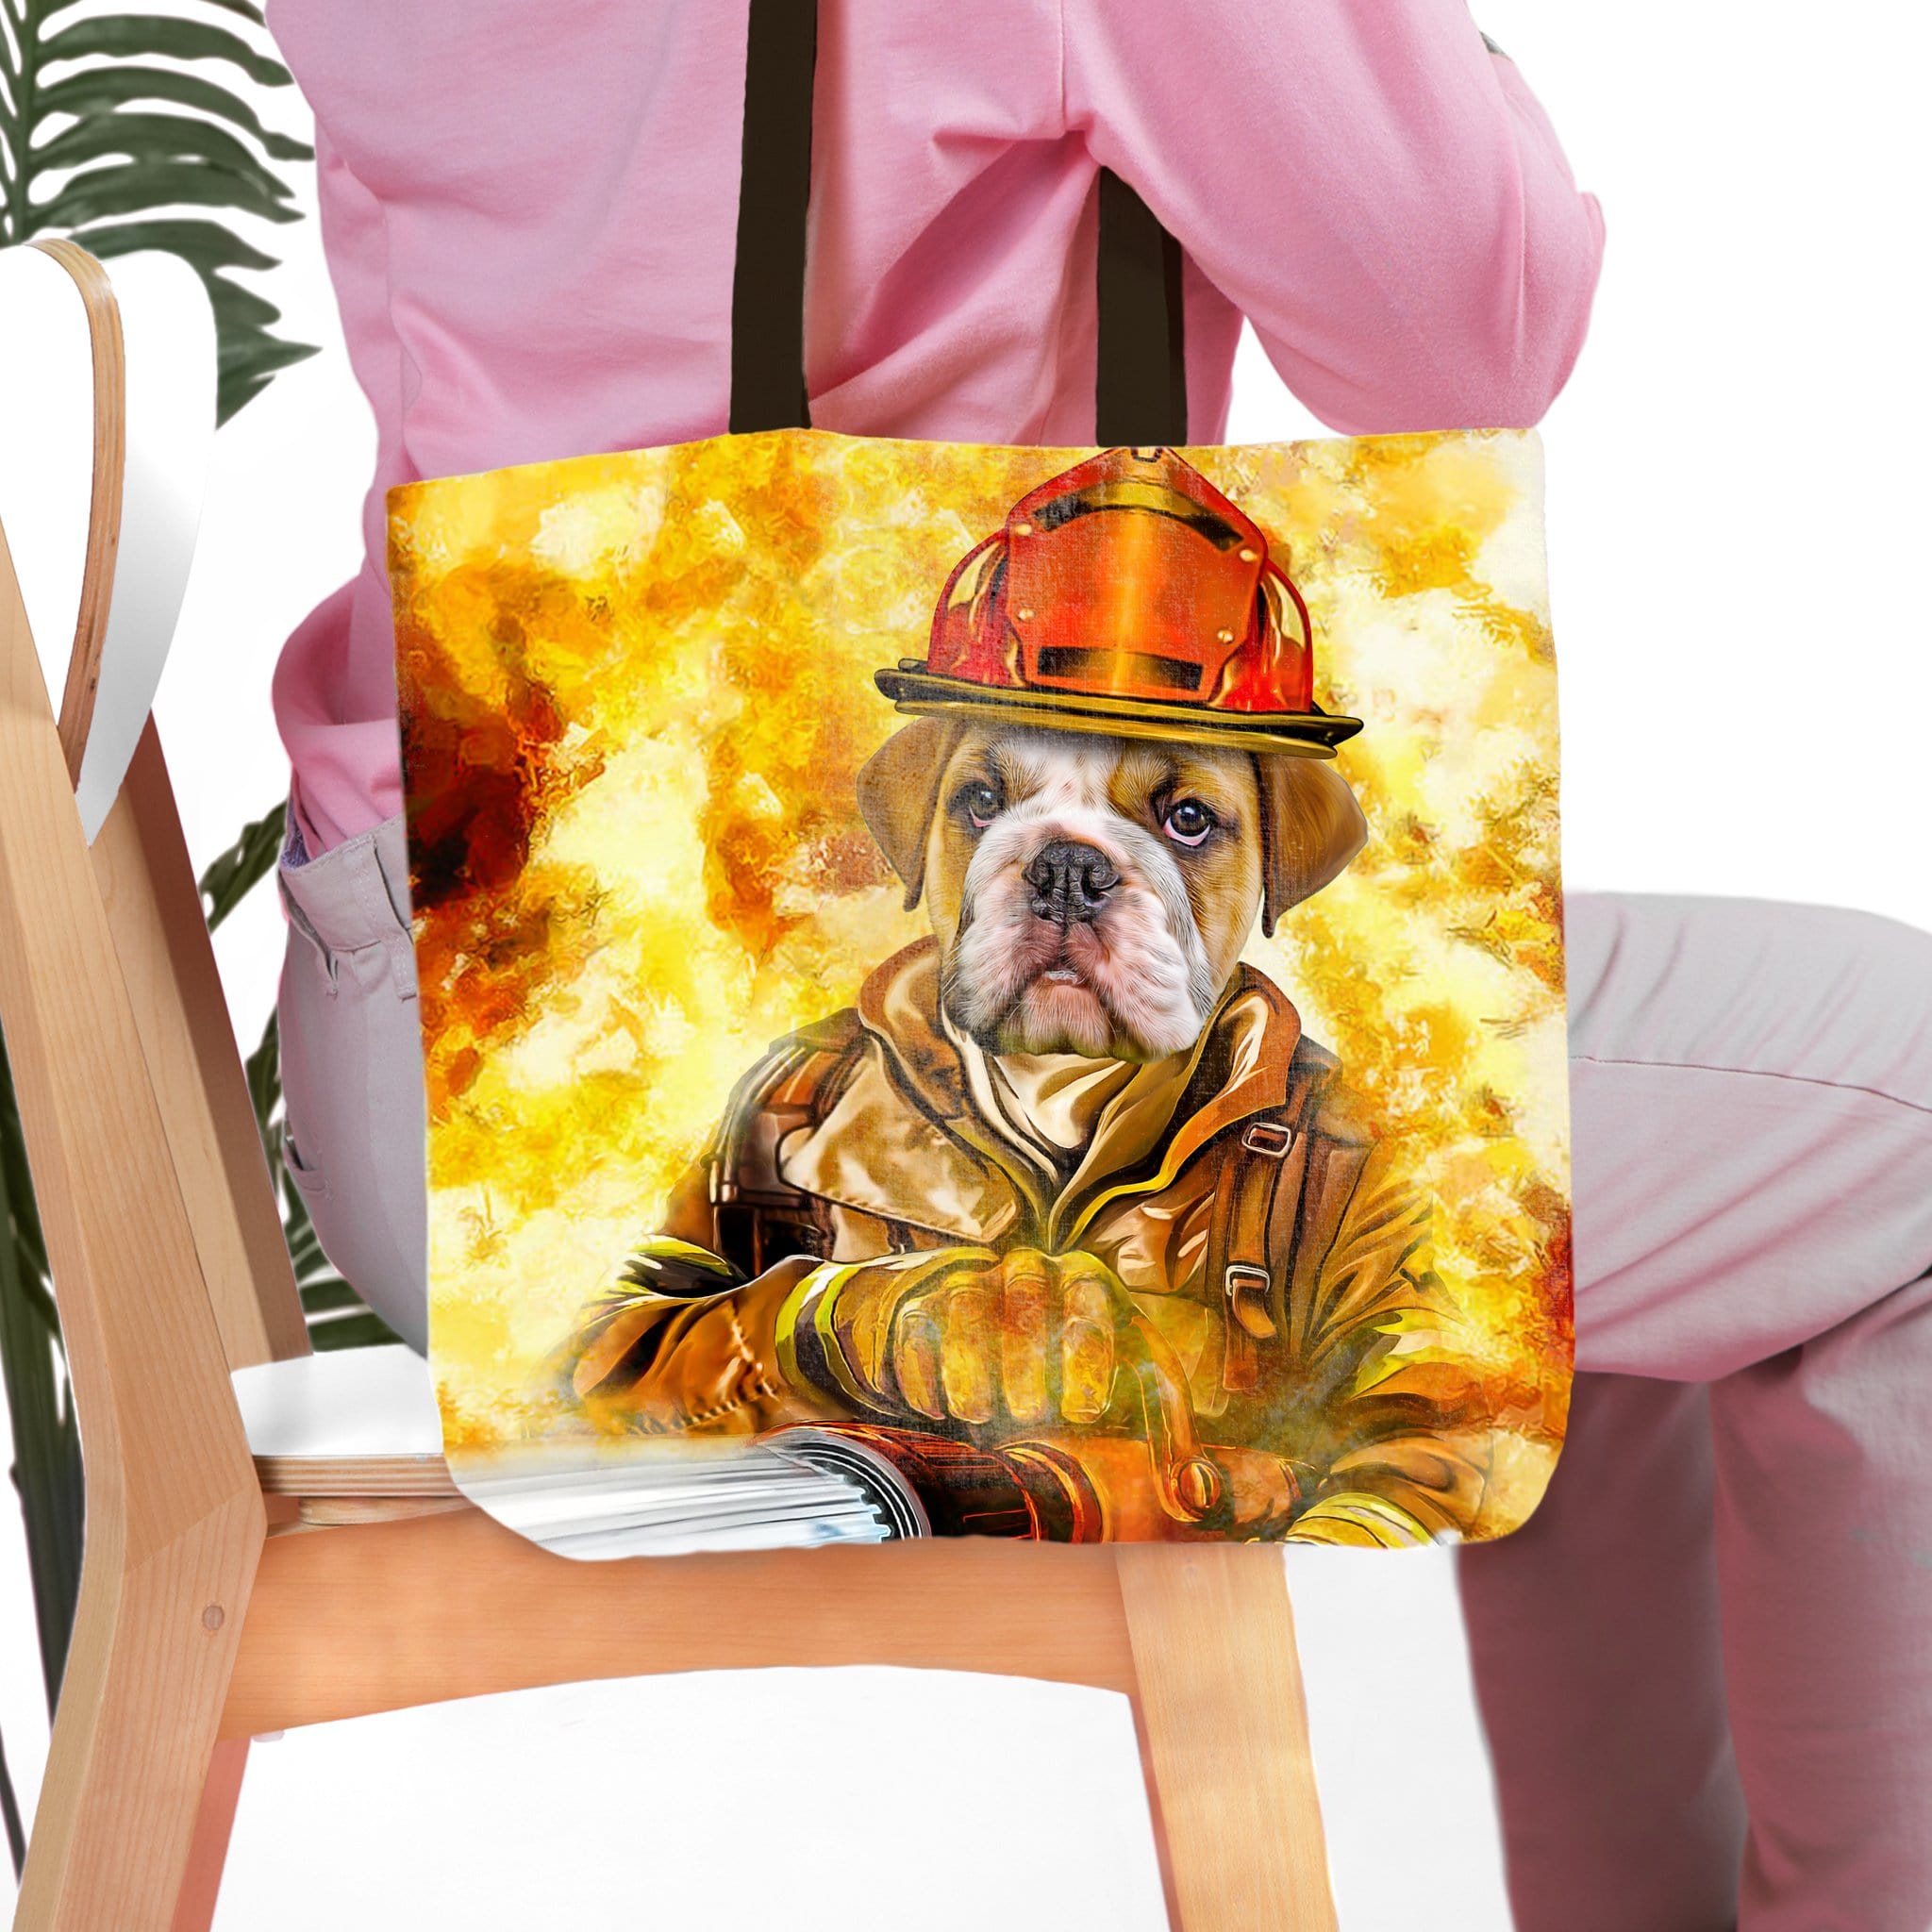 &#39;The Firefighter&#39; Personalized Tote Bag